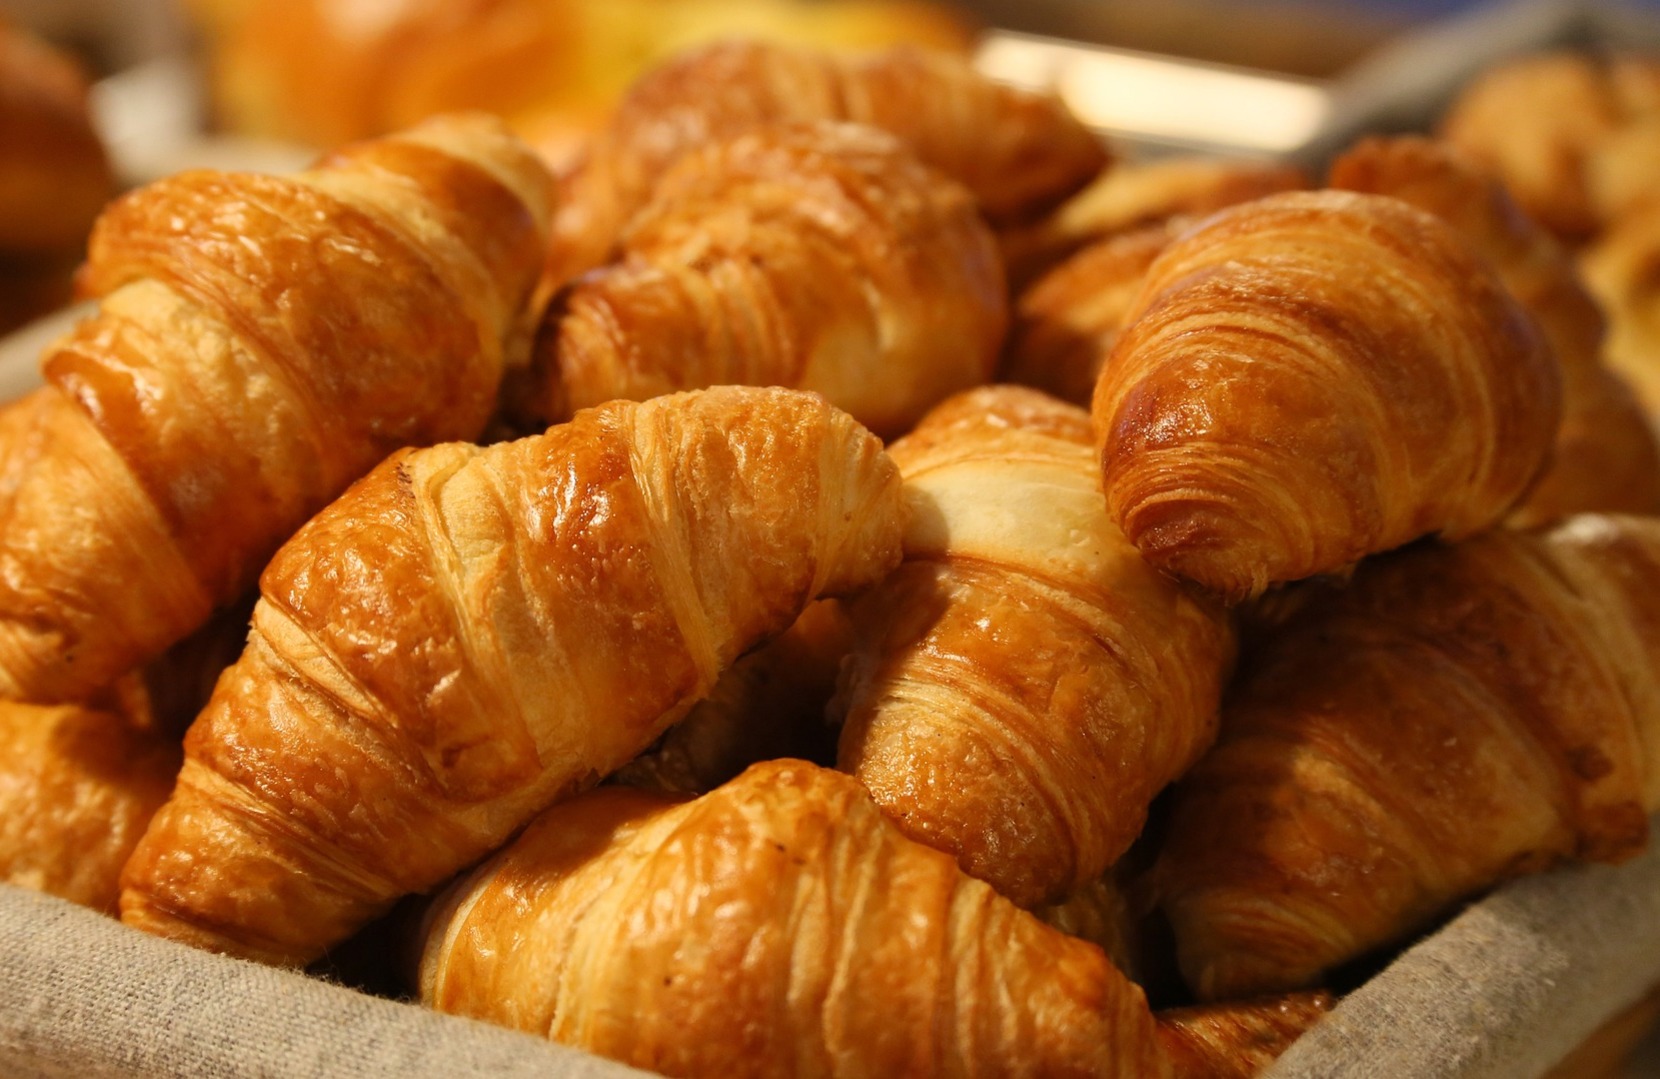 A basket of freshly baked croissants.  Click the picture, or the link below, to go to our personal injury solicitors’ no win no fee coeliac negligence compensation claims page.